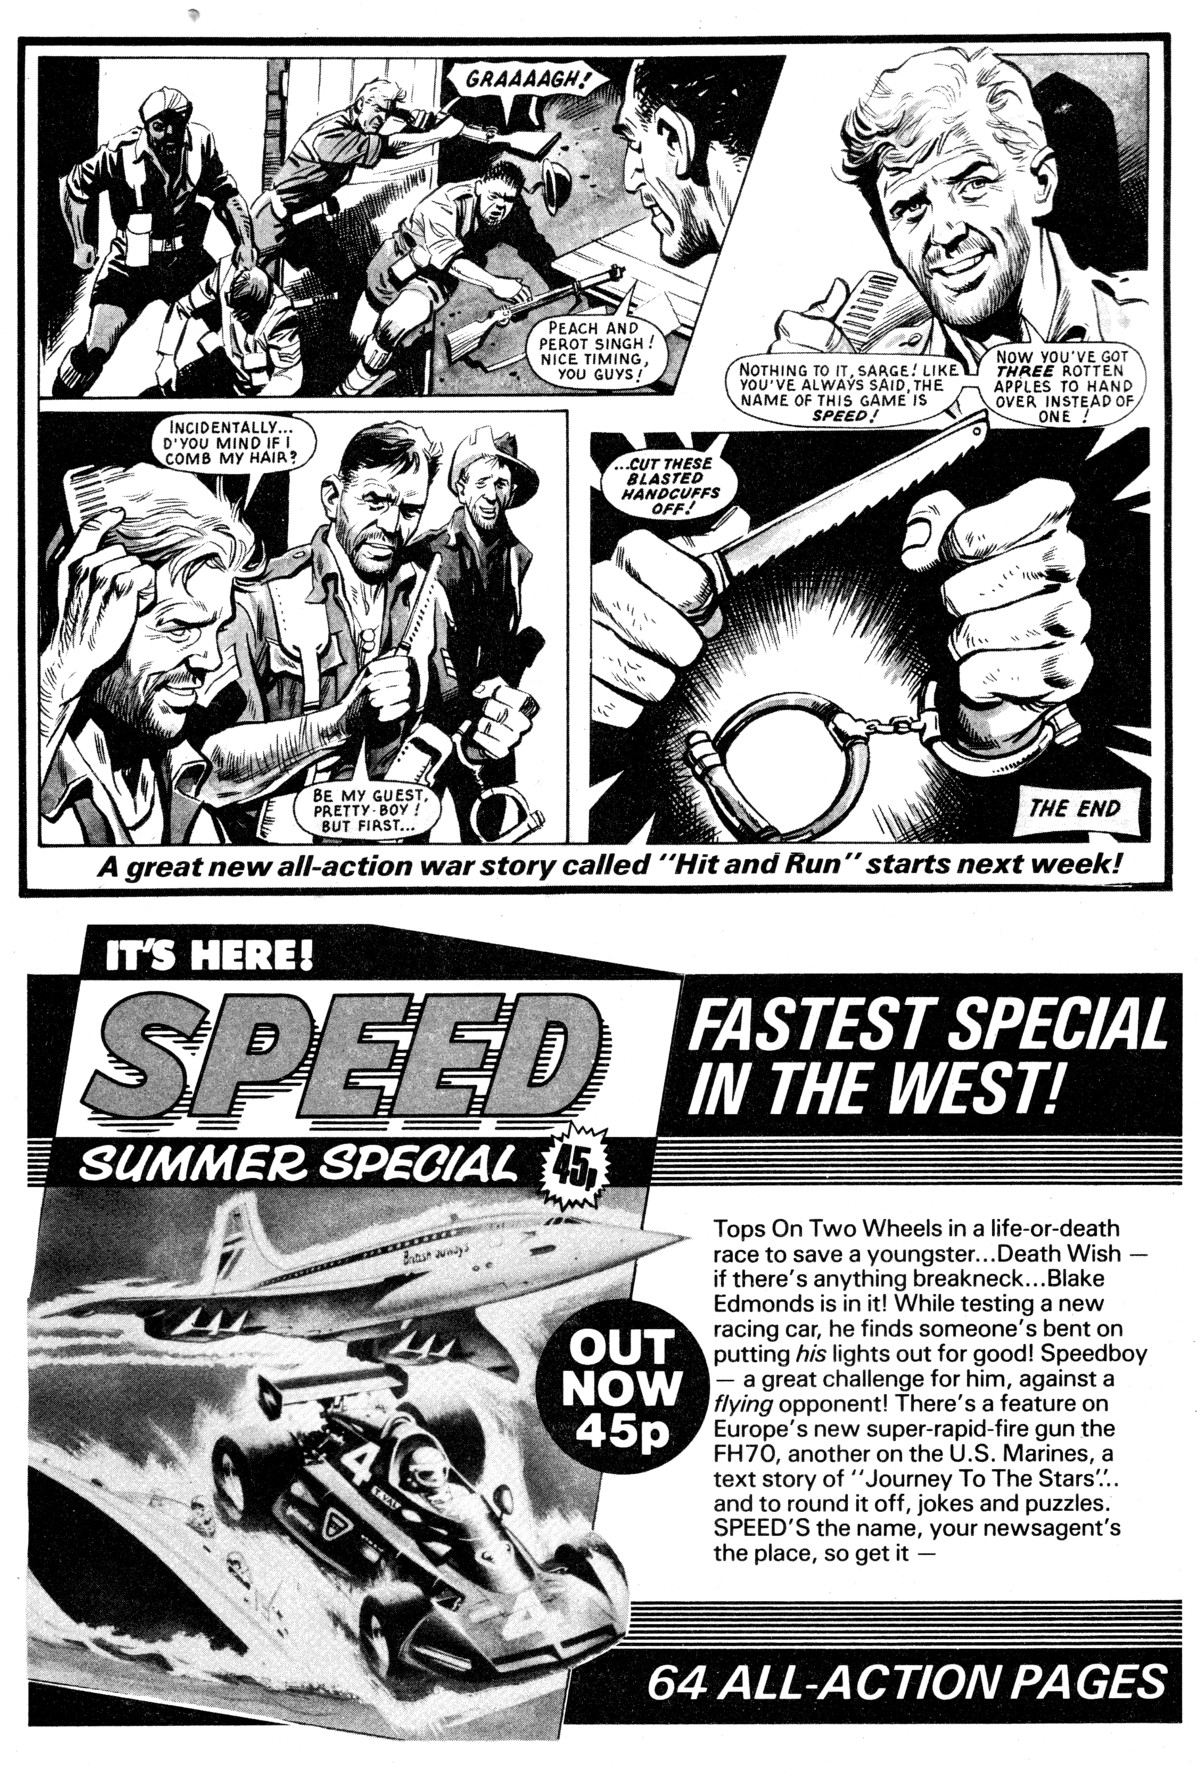 Read online Speed comic -  Issue #21 - 7